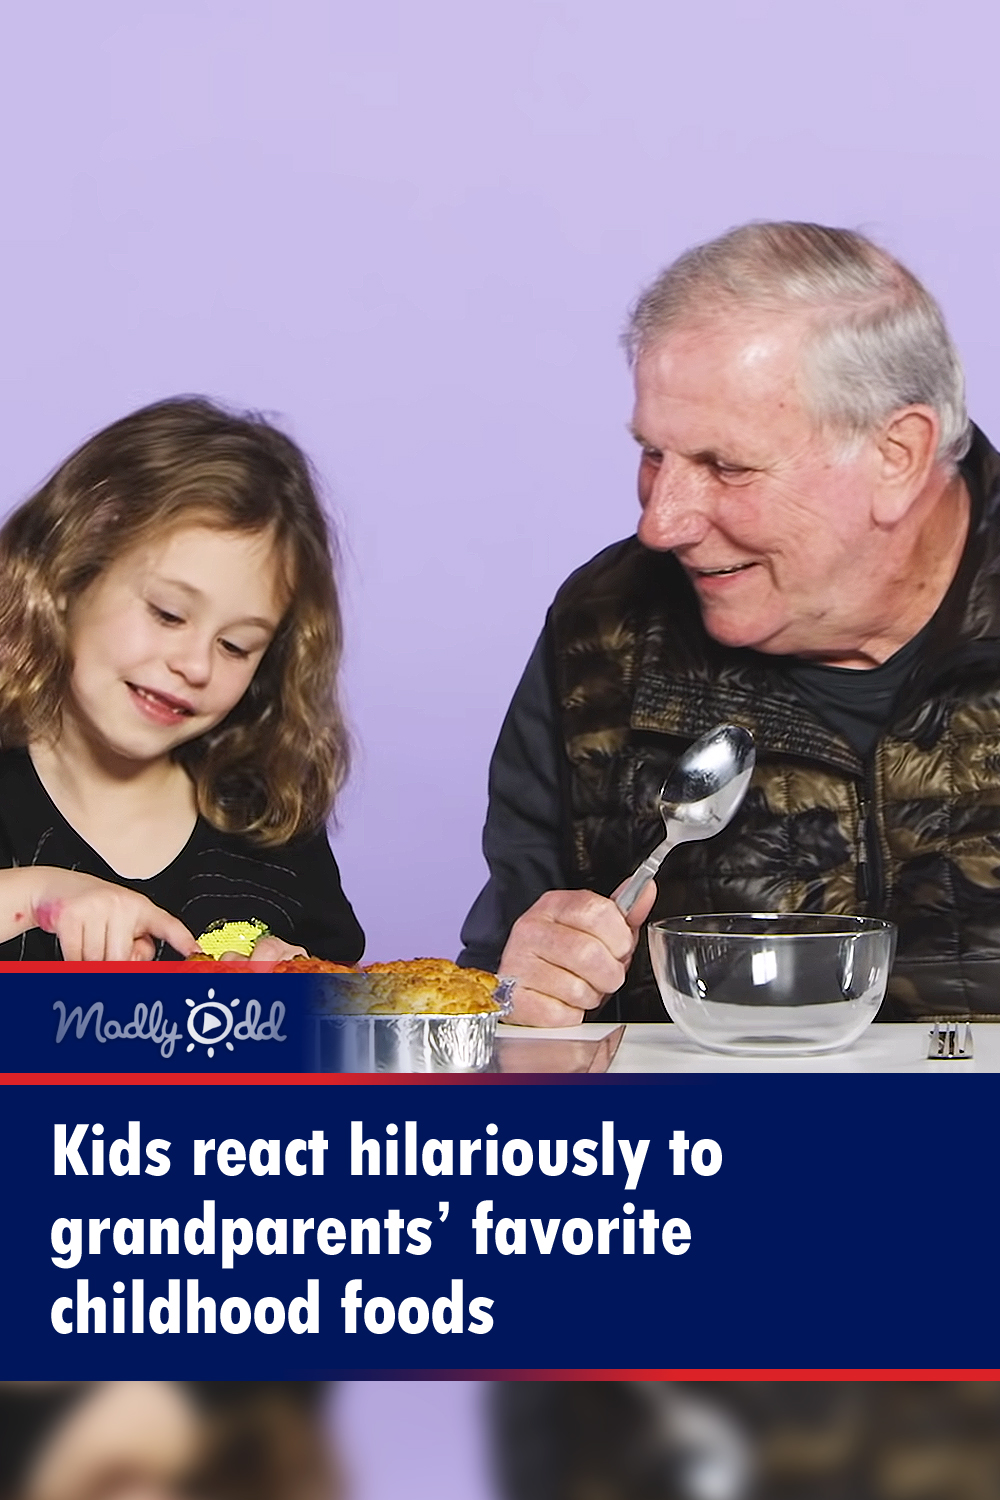 Kids react hilariously to grandparents’ favorite childhood foods